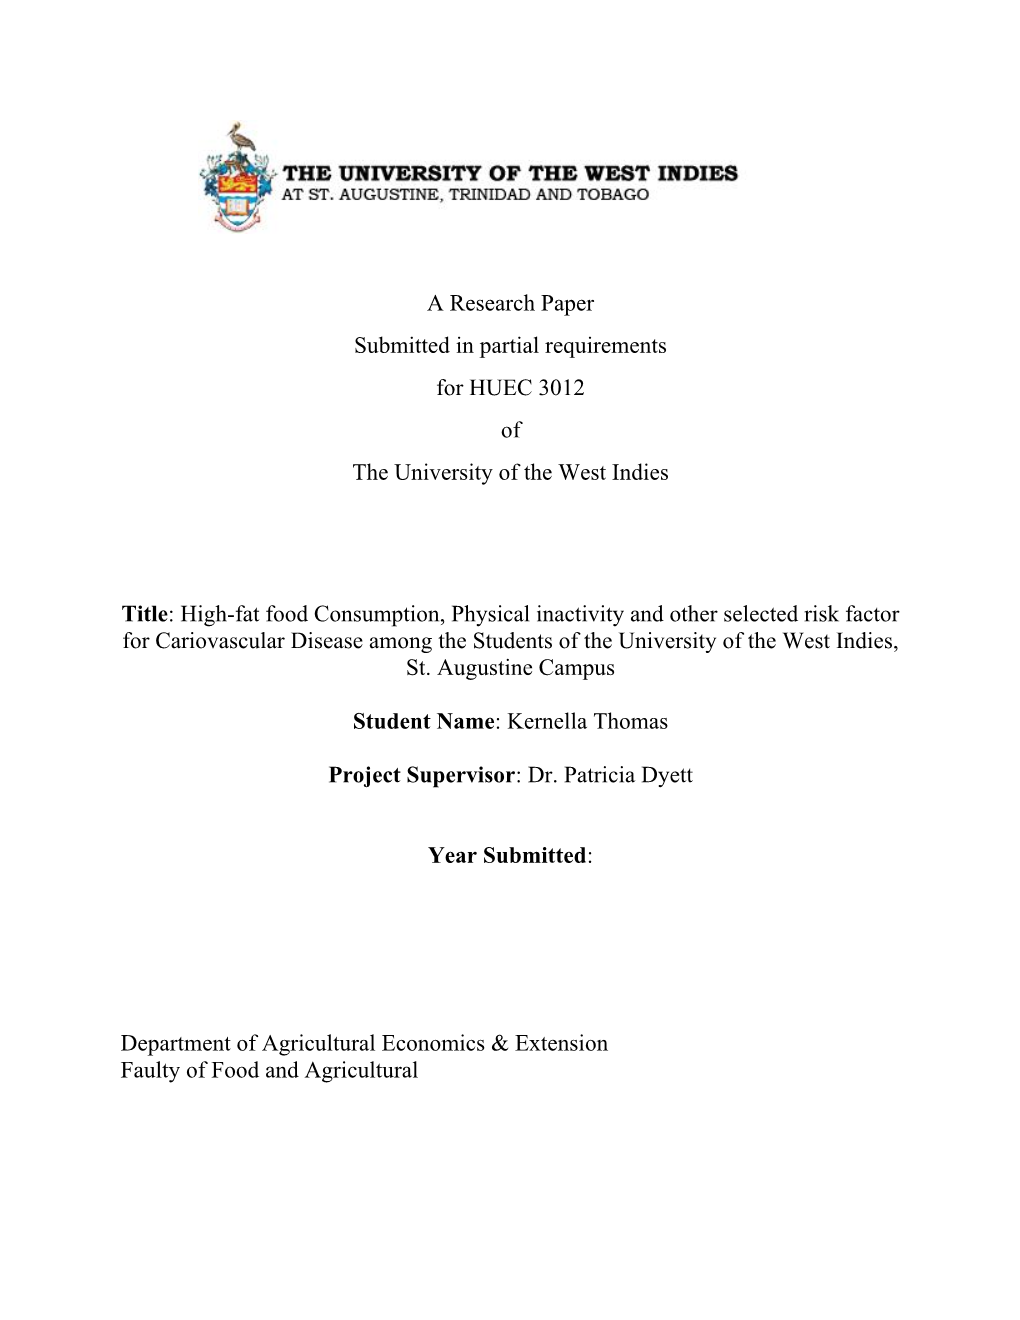 A Research Paper Submitted in Partial Requirements for HUEC 3012 of the University of the West Indies